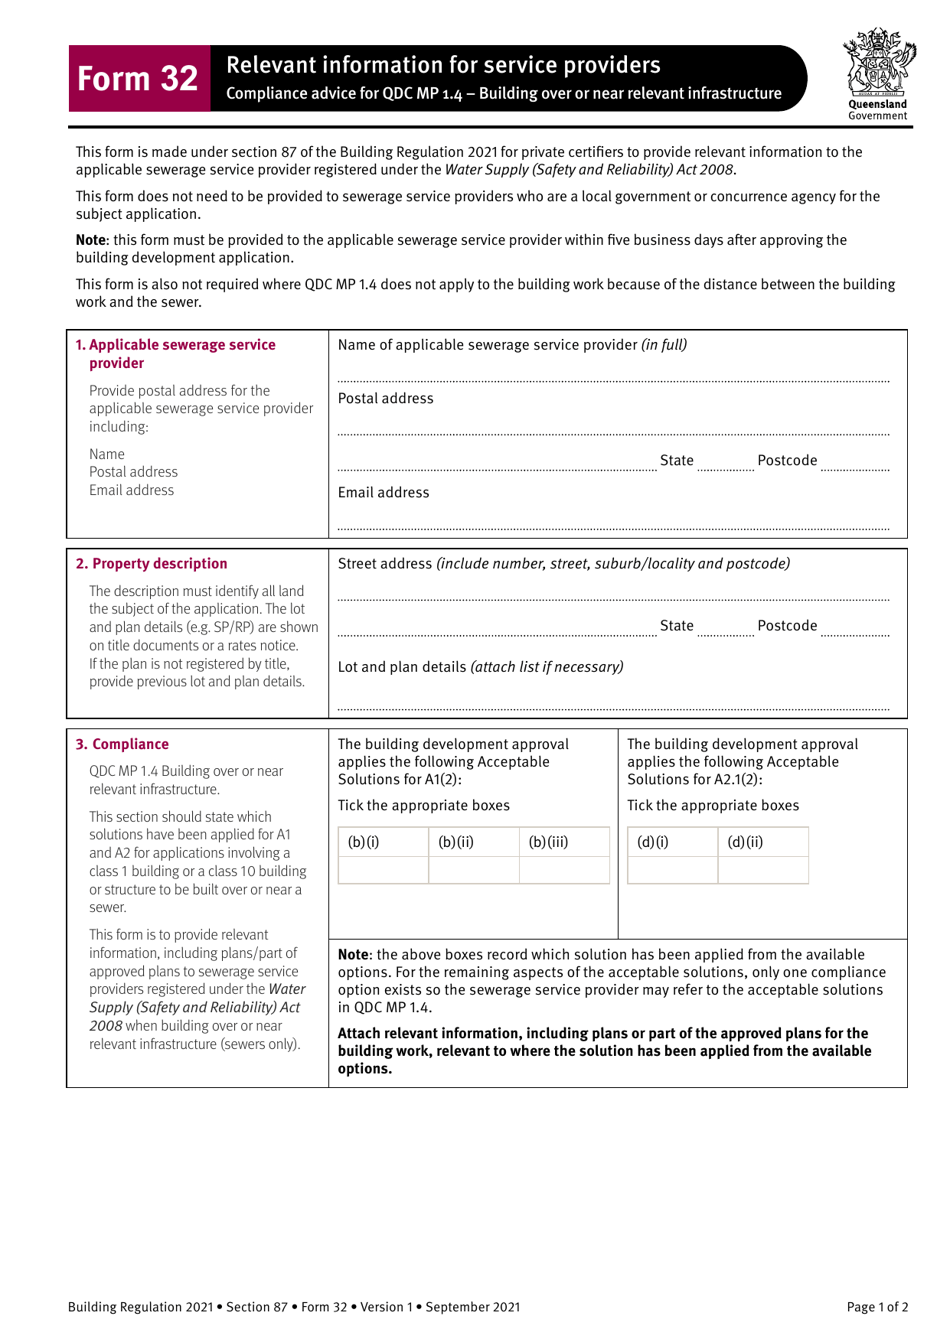 Form 32 Relevant Information for Service Providers - Queensland, Australia, Page 1